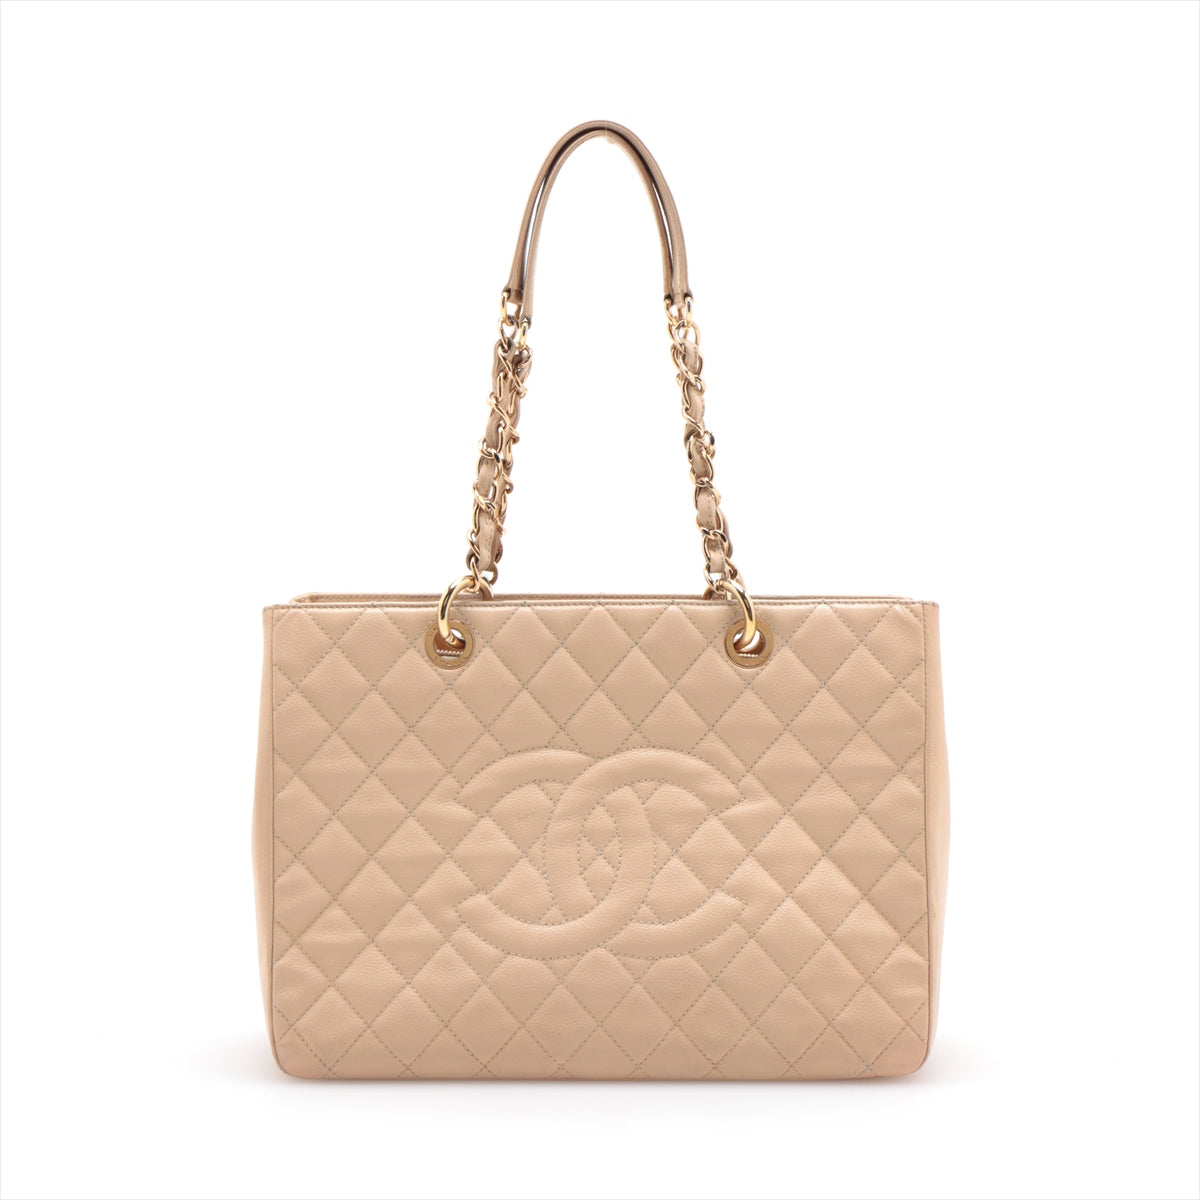 Chanel GST Caviarskin Chain tote bag Beige Gold Metal fittings 13786592